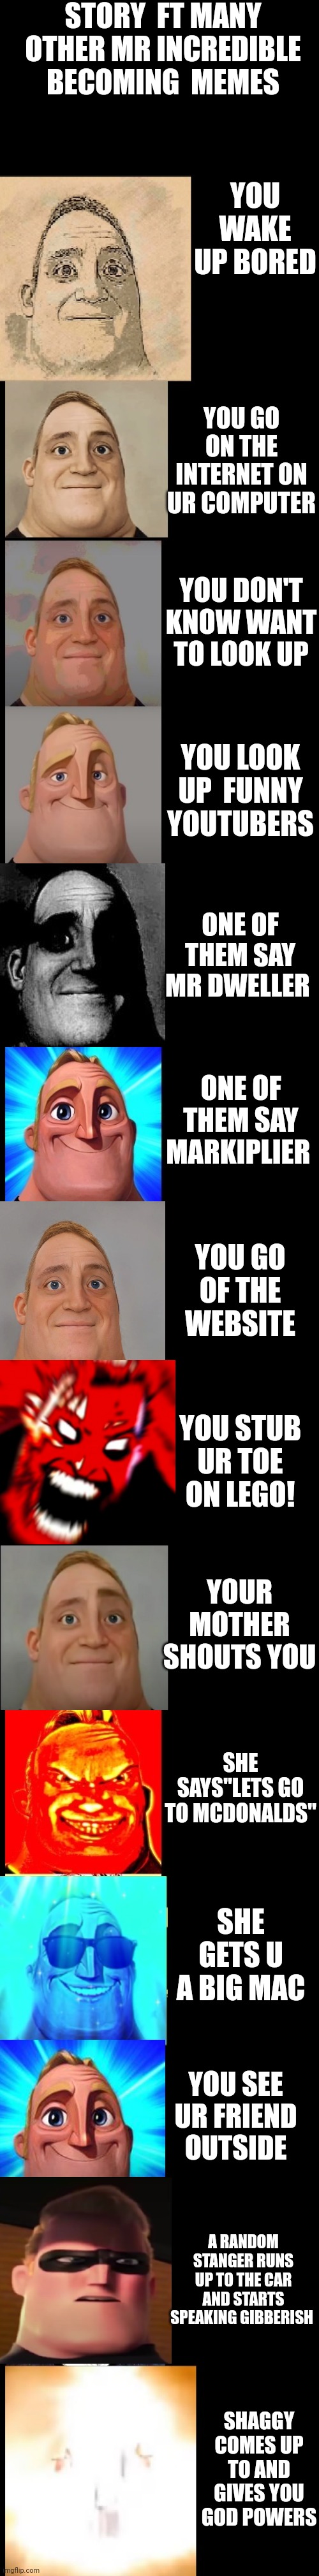 Cool"WOAH" | STORY  FT MANY OTHER MR INCREDIBLE BECOMING  MEMES; YOU WAKE UP BORED; YOU GO ON THE INTERNET ON UR COMPUTER; YOU DON'T KNOW WANT TO LOOK UP; YOU LOOK UP  FUNNY YOUTUBERS; ONE OF THEM SAY MR DWELLER; ONE OF THEM SAY MARKIPLIER; YOU GO OF THE WEBSITE; YOU STUB UR TOE ON LEGO! YOUR MOTHER SHOUTS YOU; SHE SAYS"LETS GO TO MCDONALDS"; SHE GETS U A BIG MAC; YOU SEE UR FRIEND OUTSIDE; A RANDOM STANGER RUNS UP TO THE CAR AND STARTS SPEAKING GIBBERISH; SHAGGY COMES UP TO AND GIVES YOU GOD POWERS | image tagged in mr incredible becoming canny new version | made w/ Imgflip meme maker